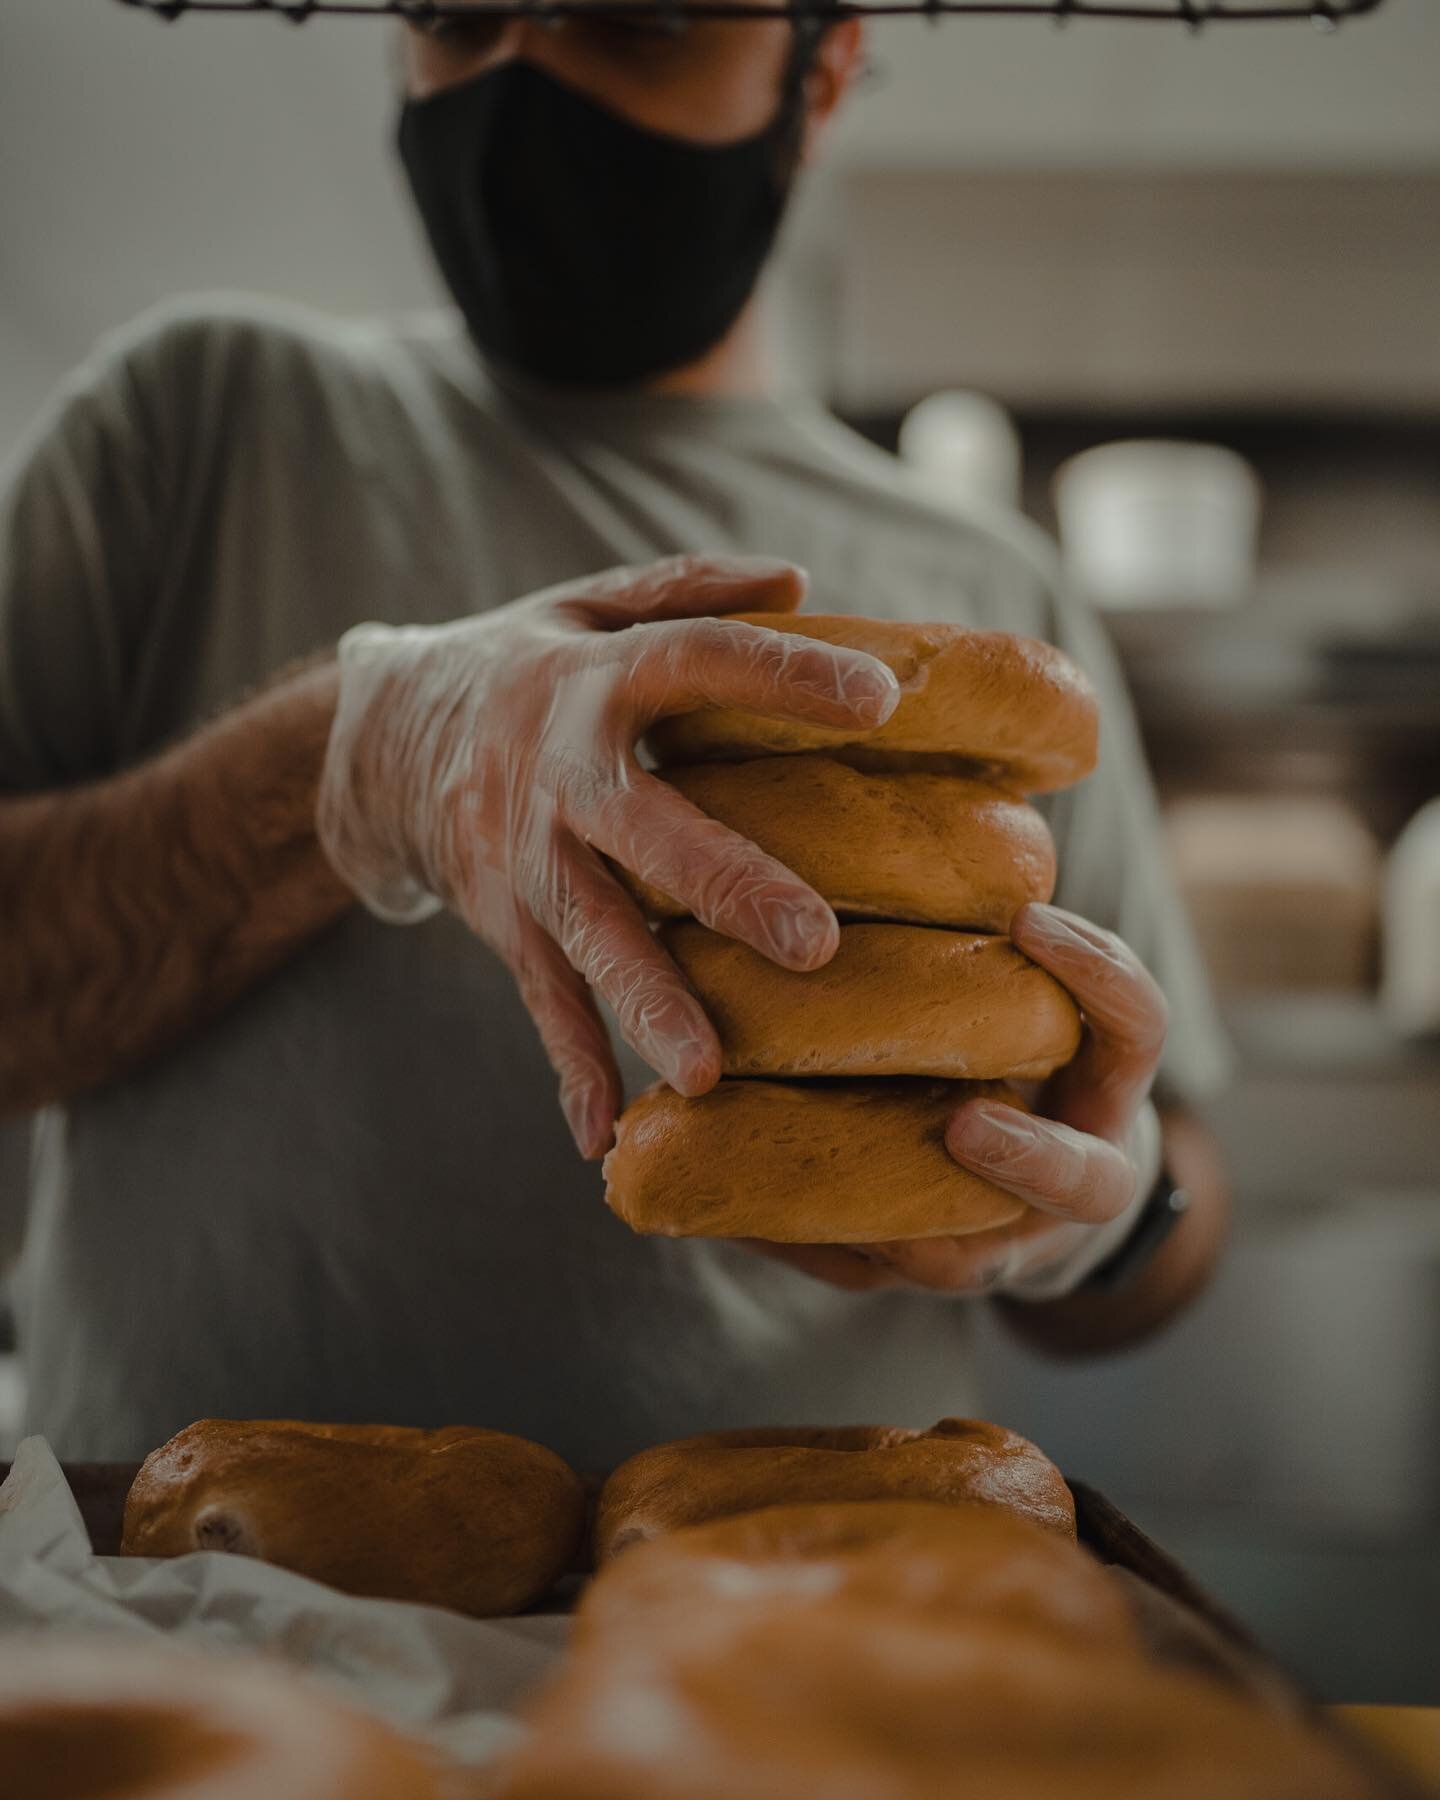 when i have the opportunity to enter someone&rsquo;s space, my goal is realness. in planning this shoot, Morgan and John were kind enough to offer to make an extra batch of bagels outside of their normal work time. sleep is already at a premium and m